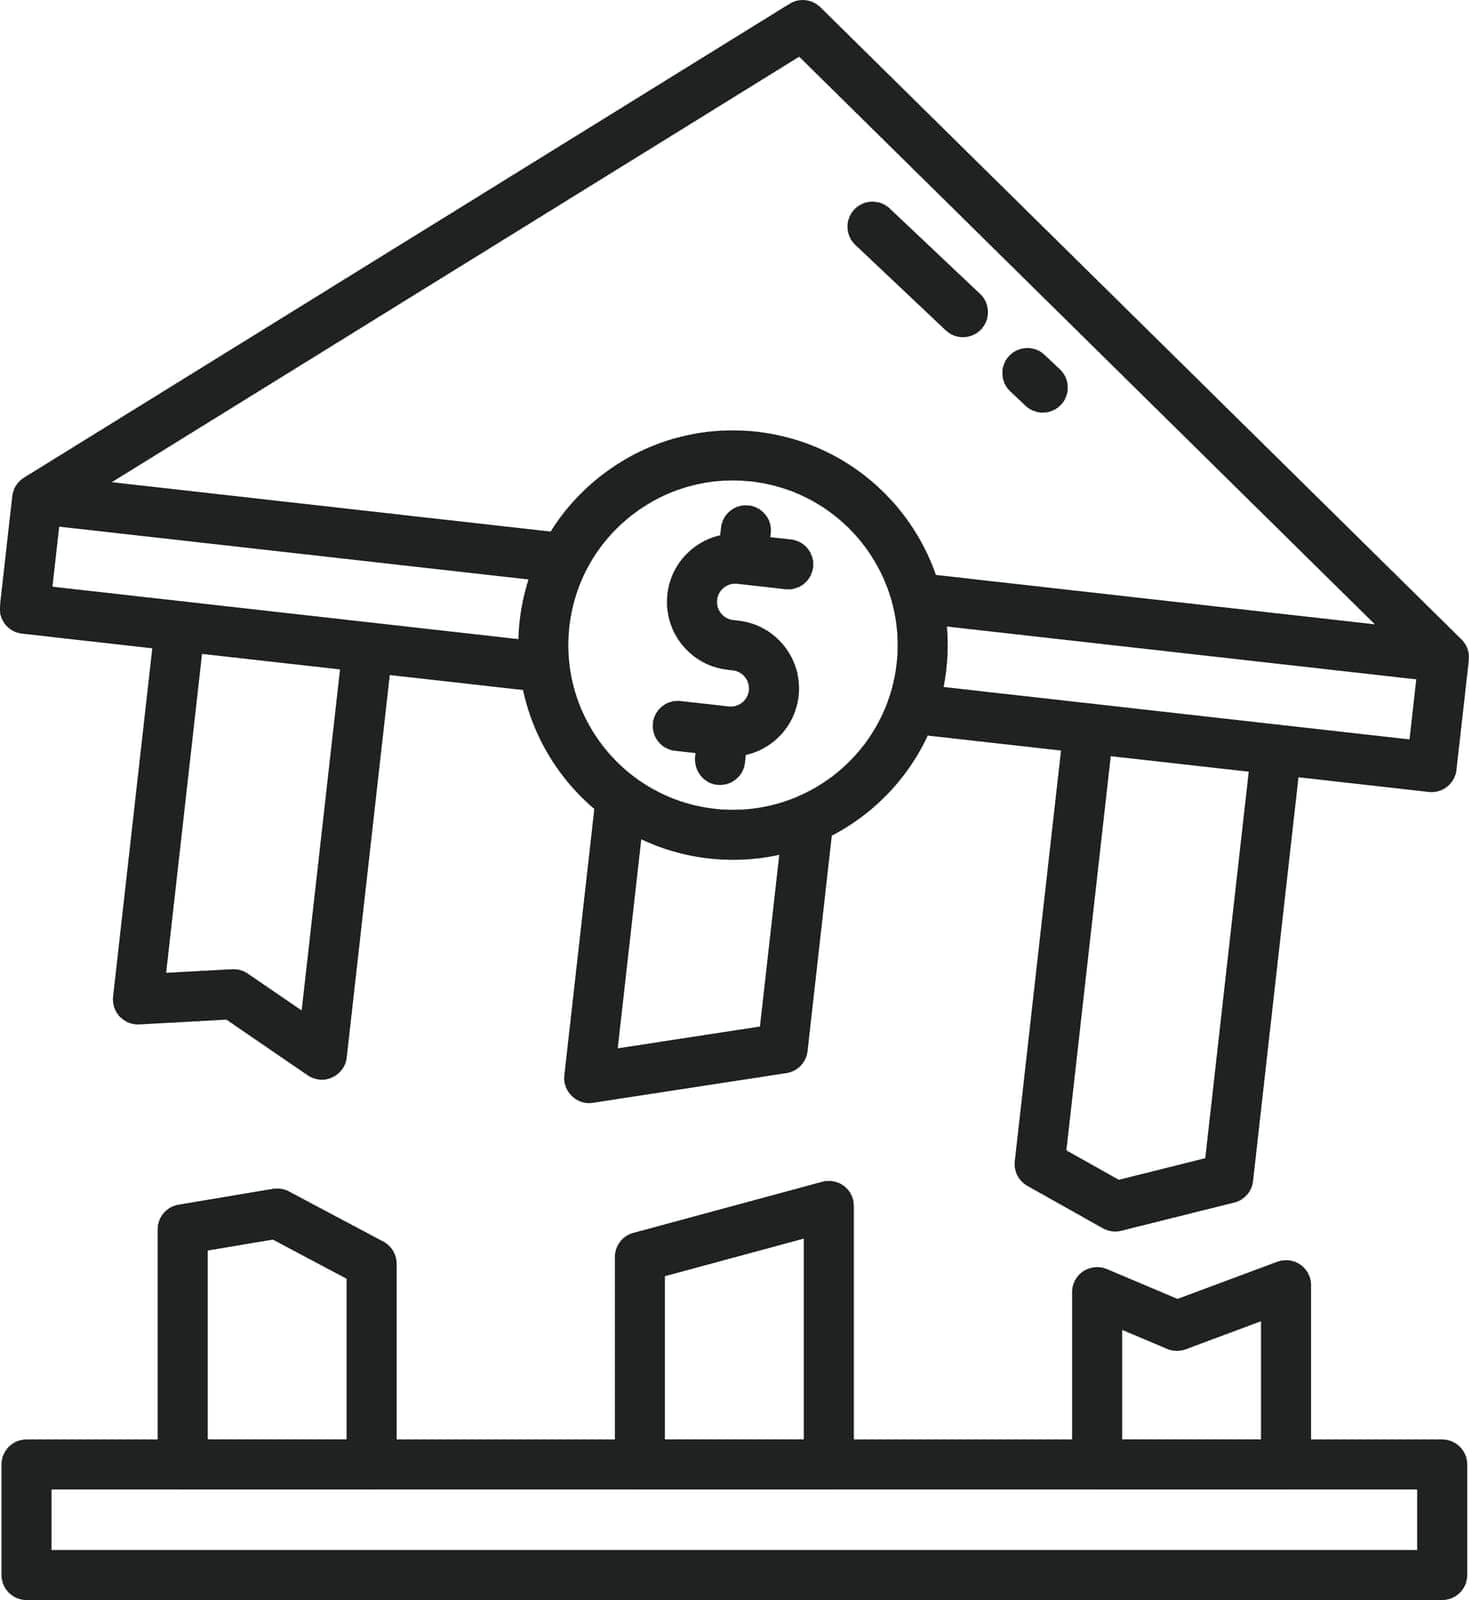 Recession icon vector image. Suitable for mobile application web application and print media.